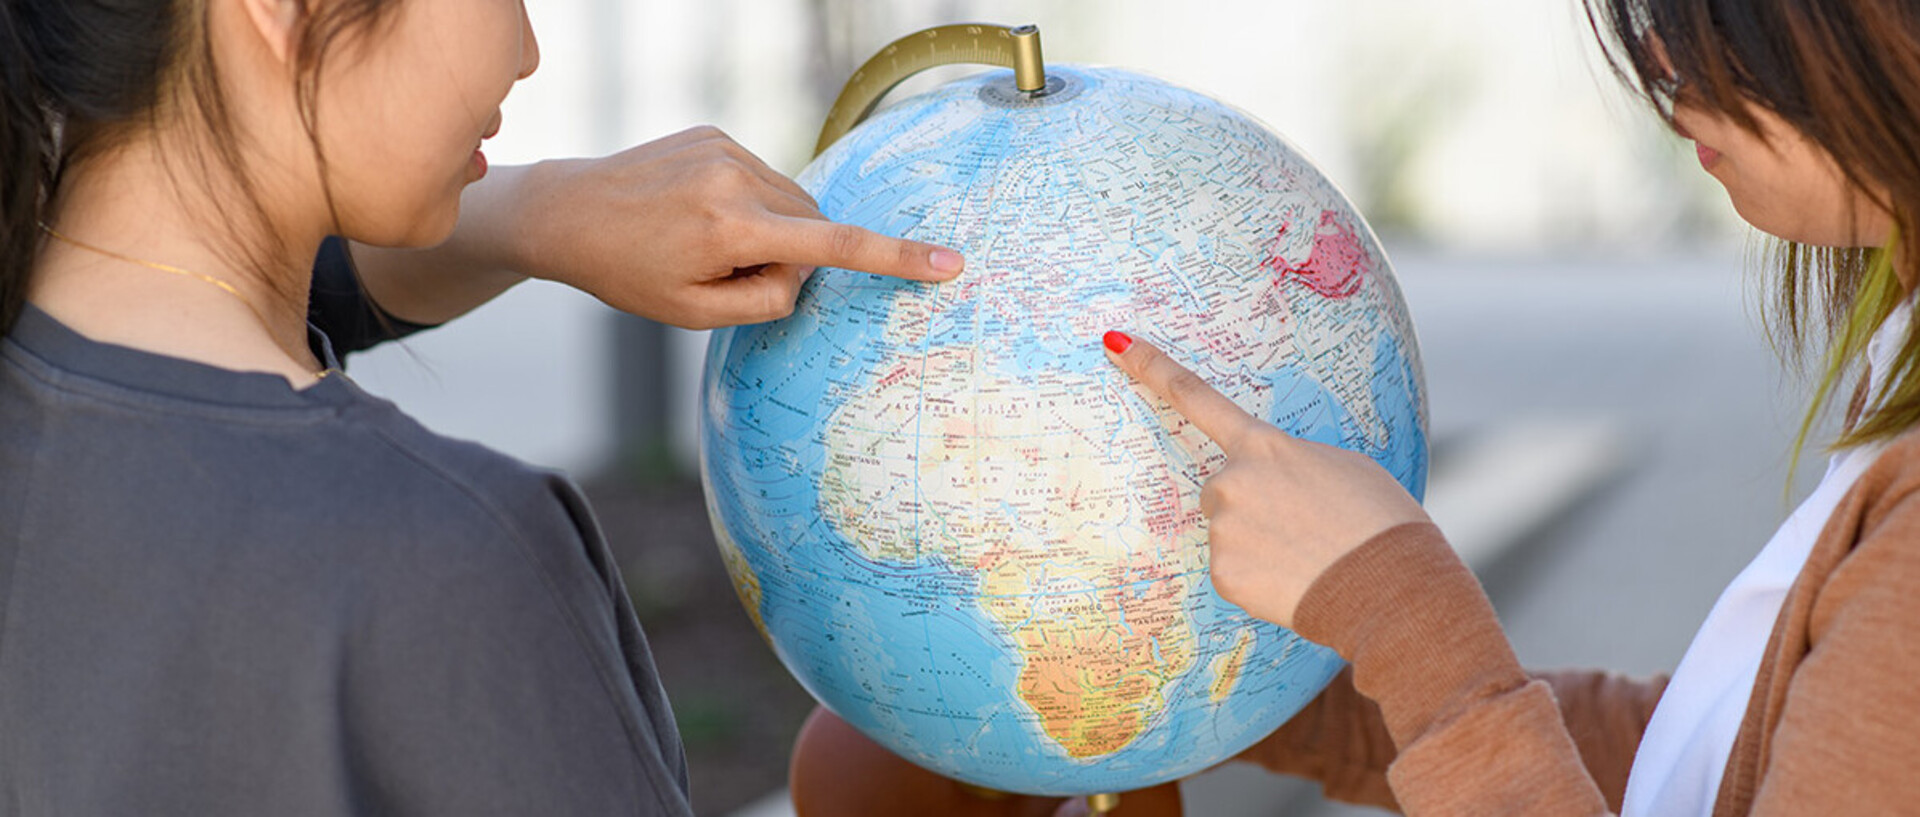 Two women are holding a globe. The one on the left is pointing at Mannheim and the one on the right is pointing at a country in the Near East.